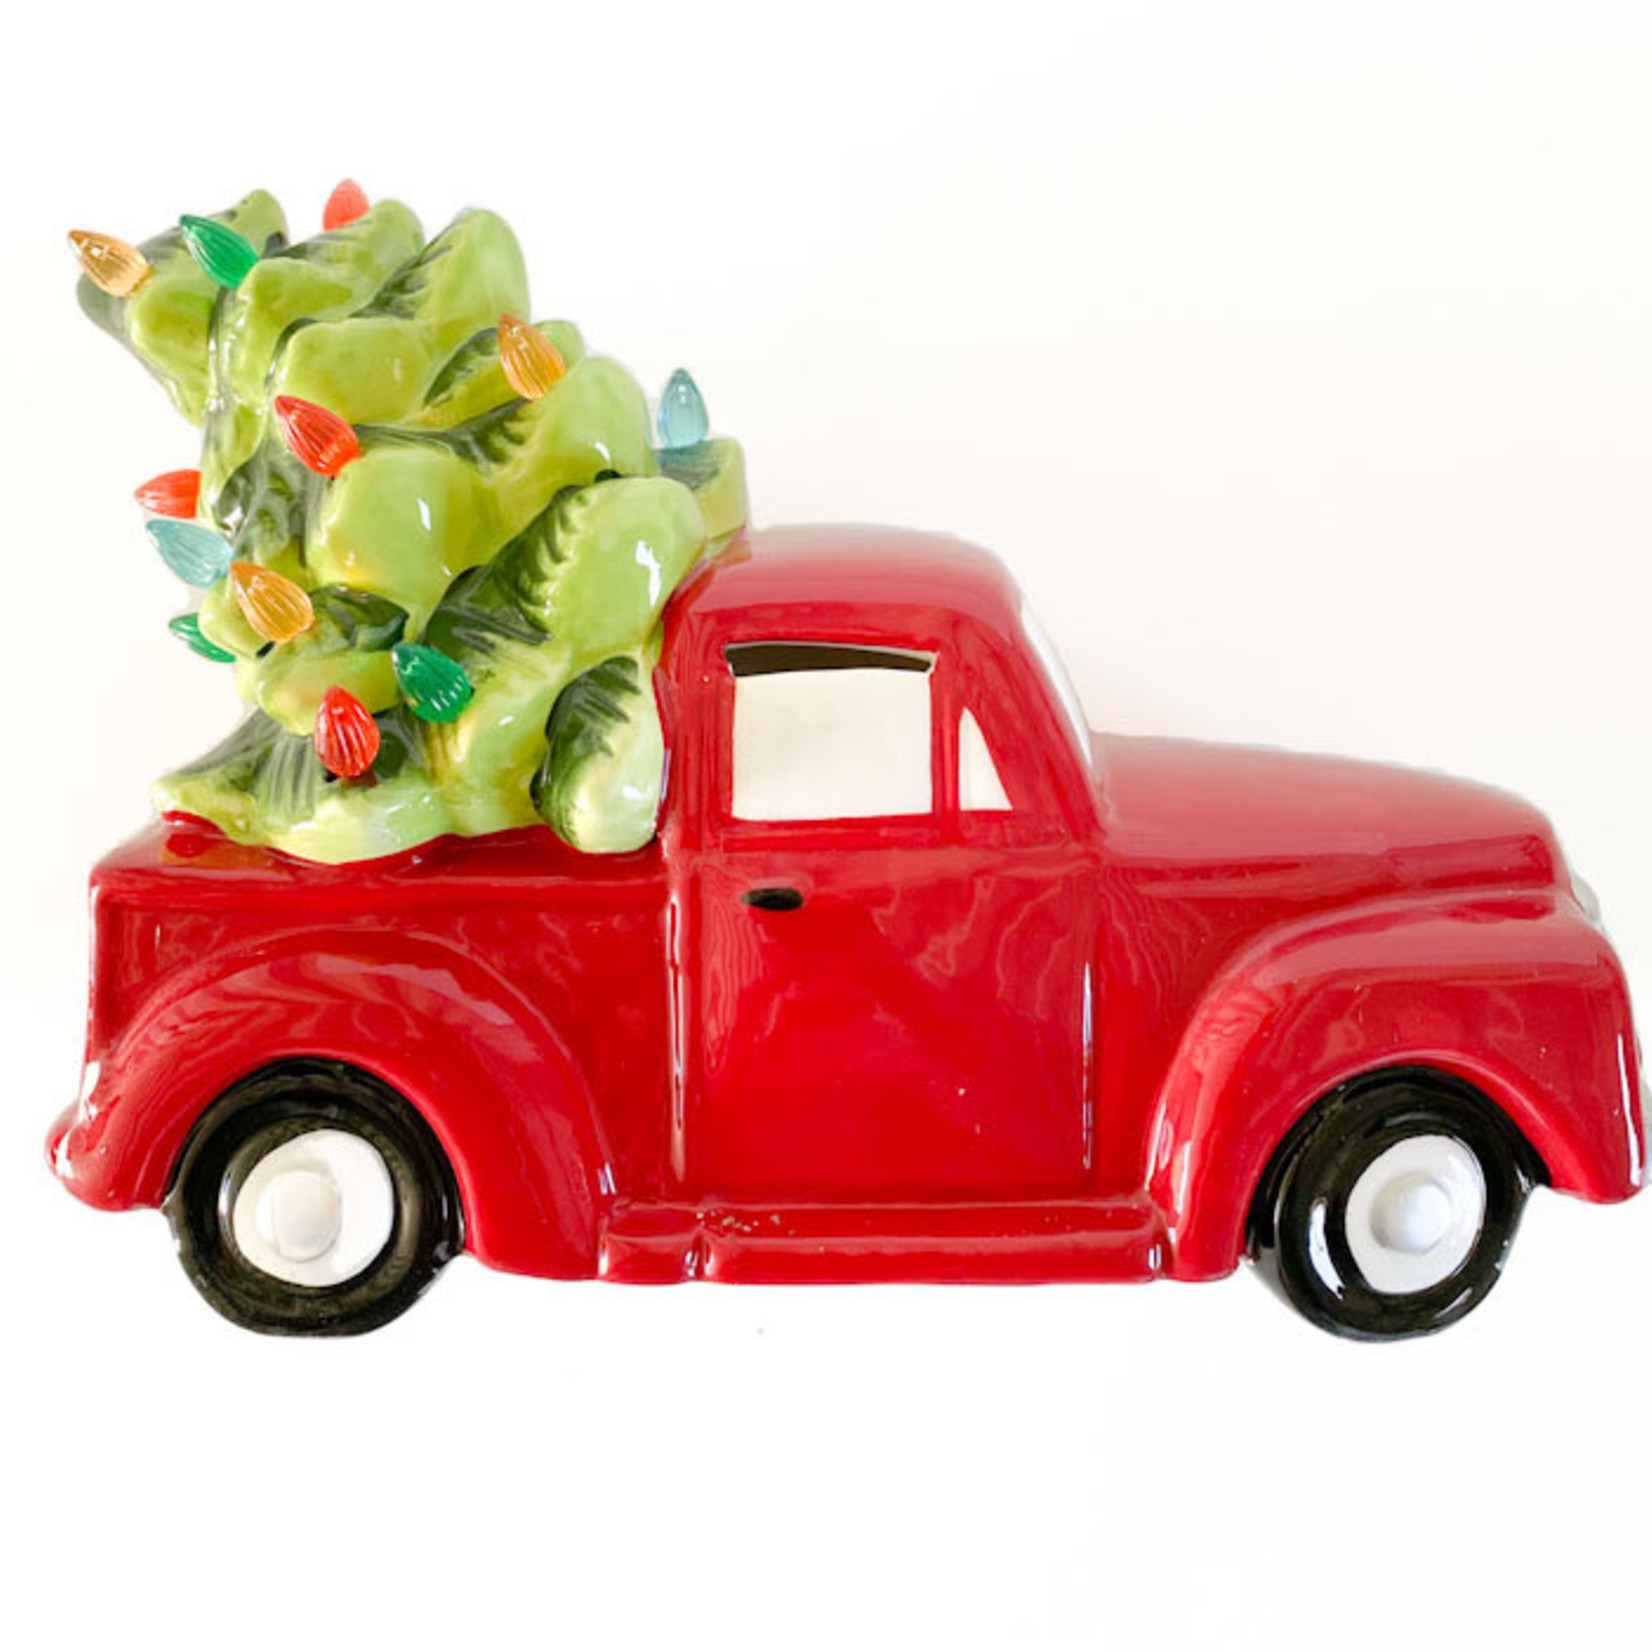 LED Red Truck with Green Tree - 12"